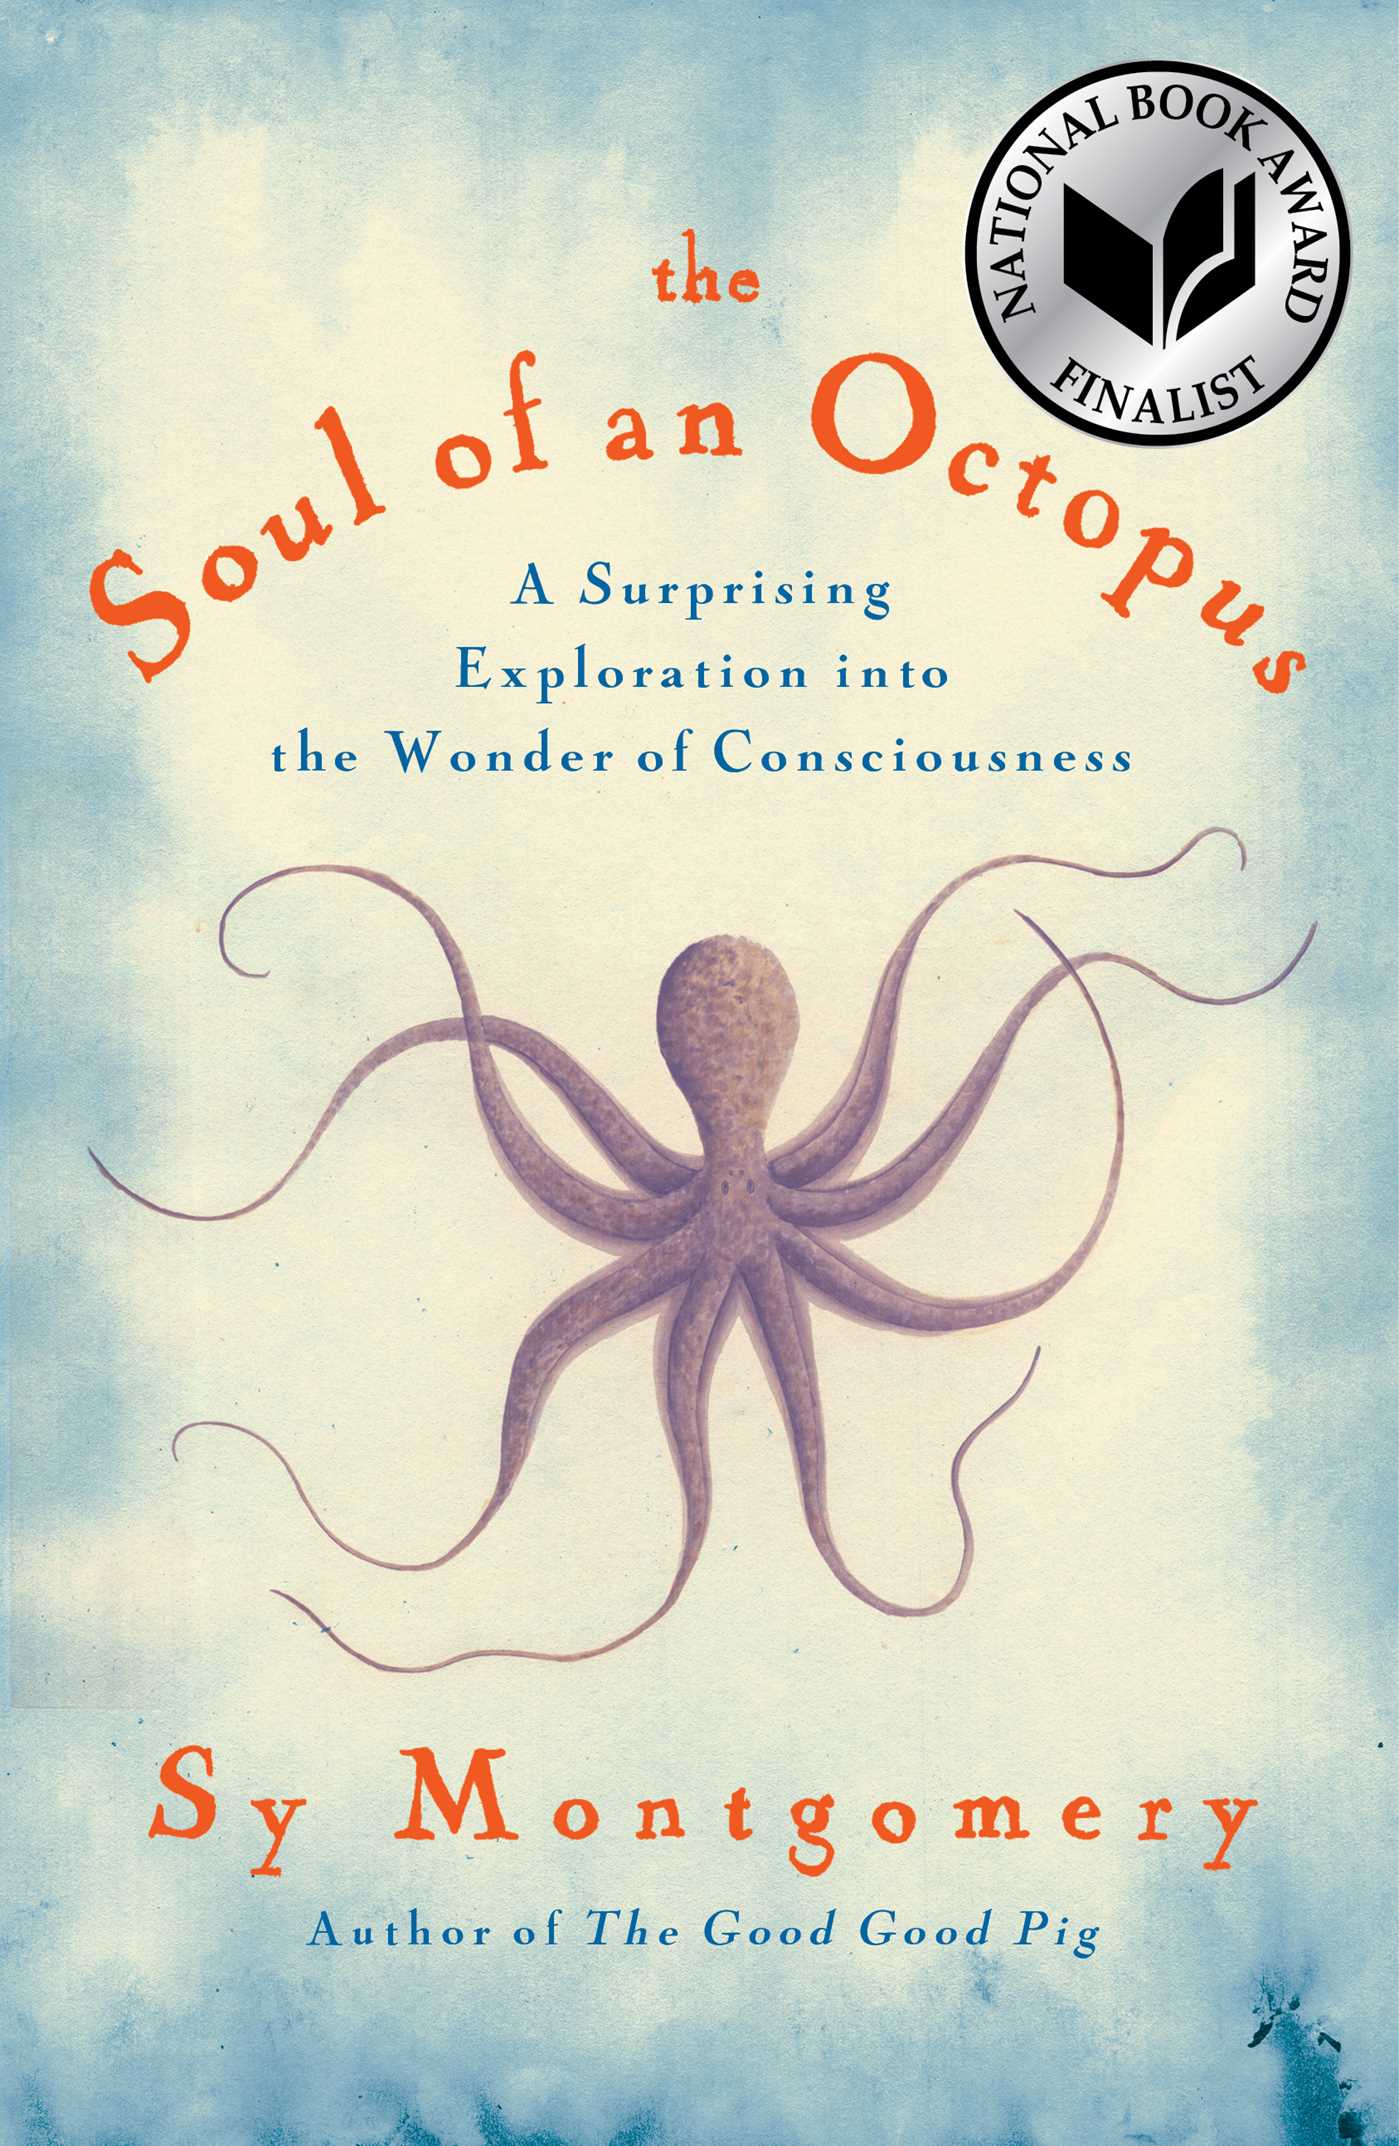 The Soul of an Octopus A Surprising Exploration into the Wonder of Consciousness cover image